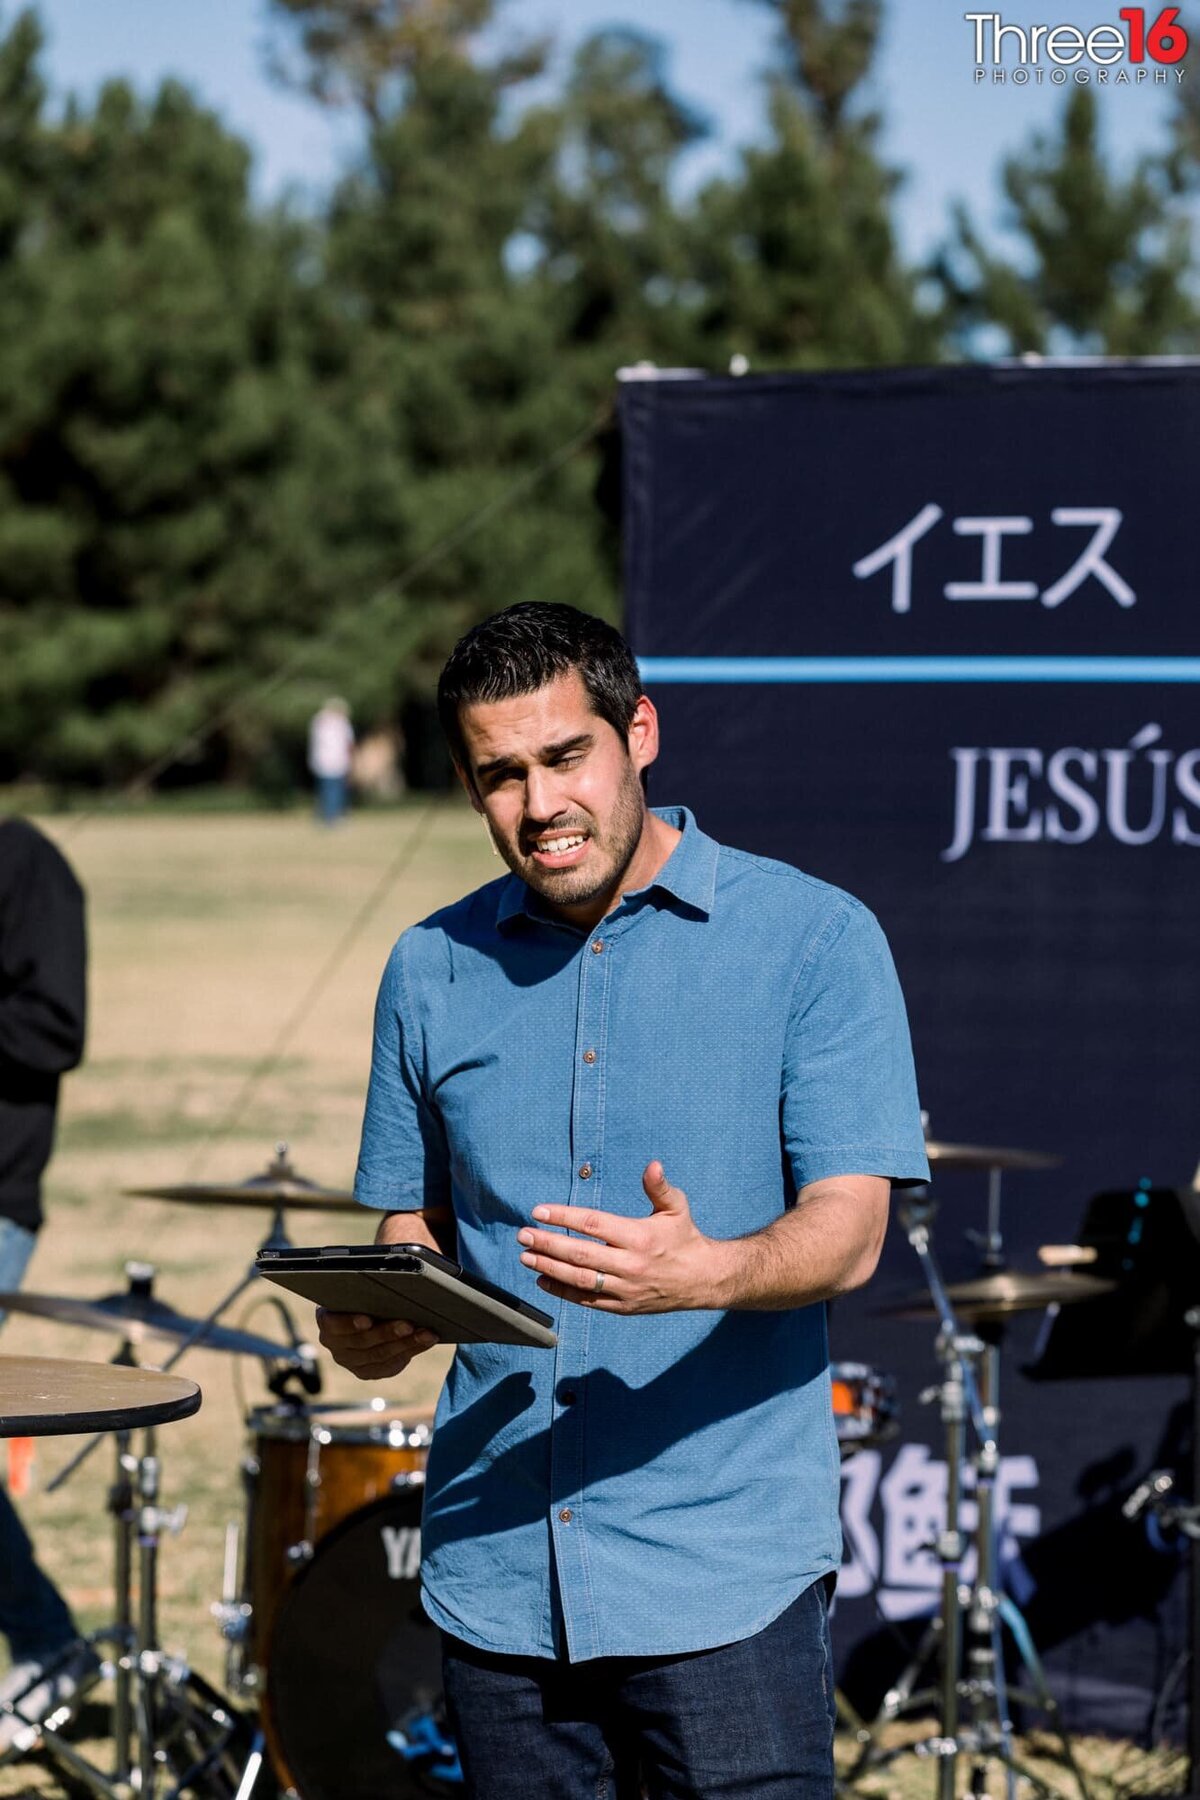 A pastor speaks to a group of people at an outdoor event